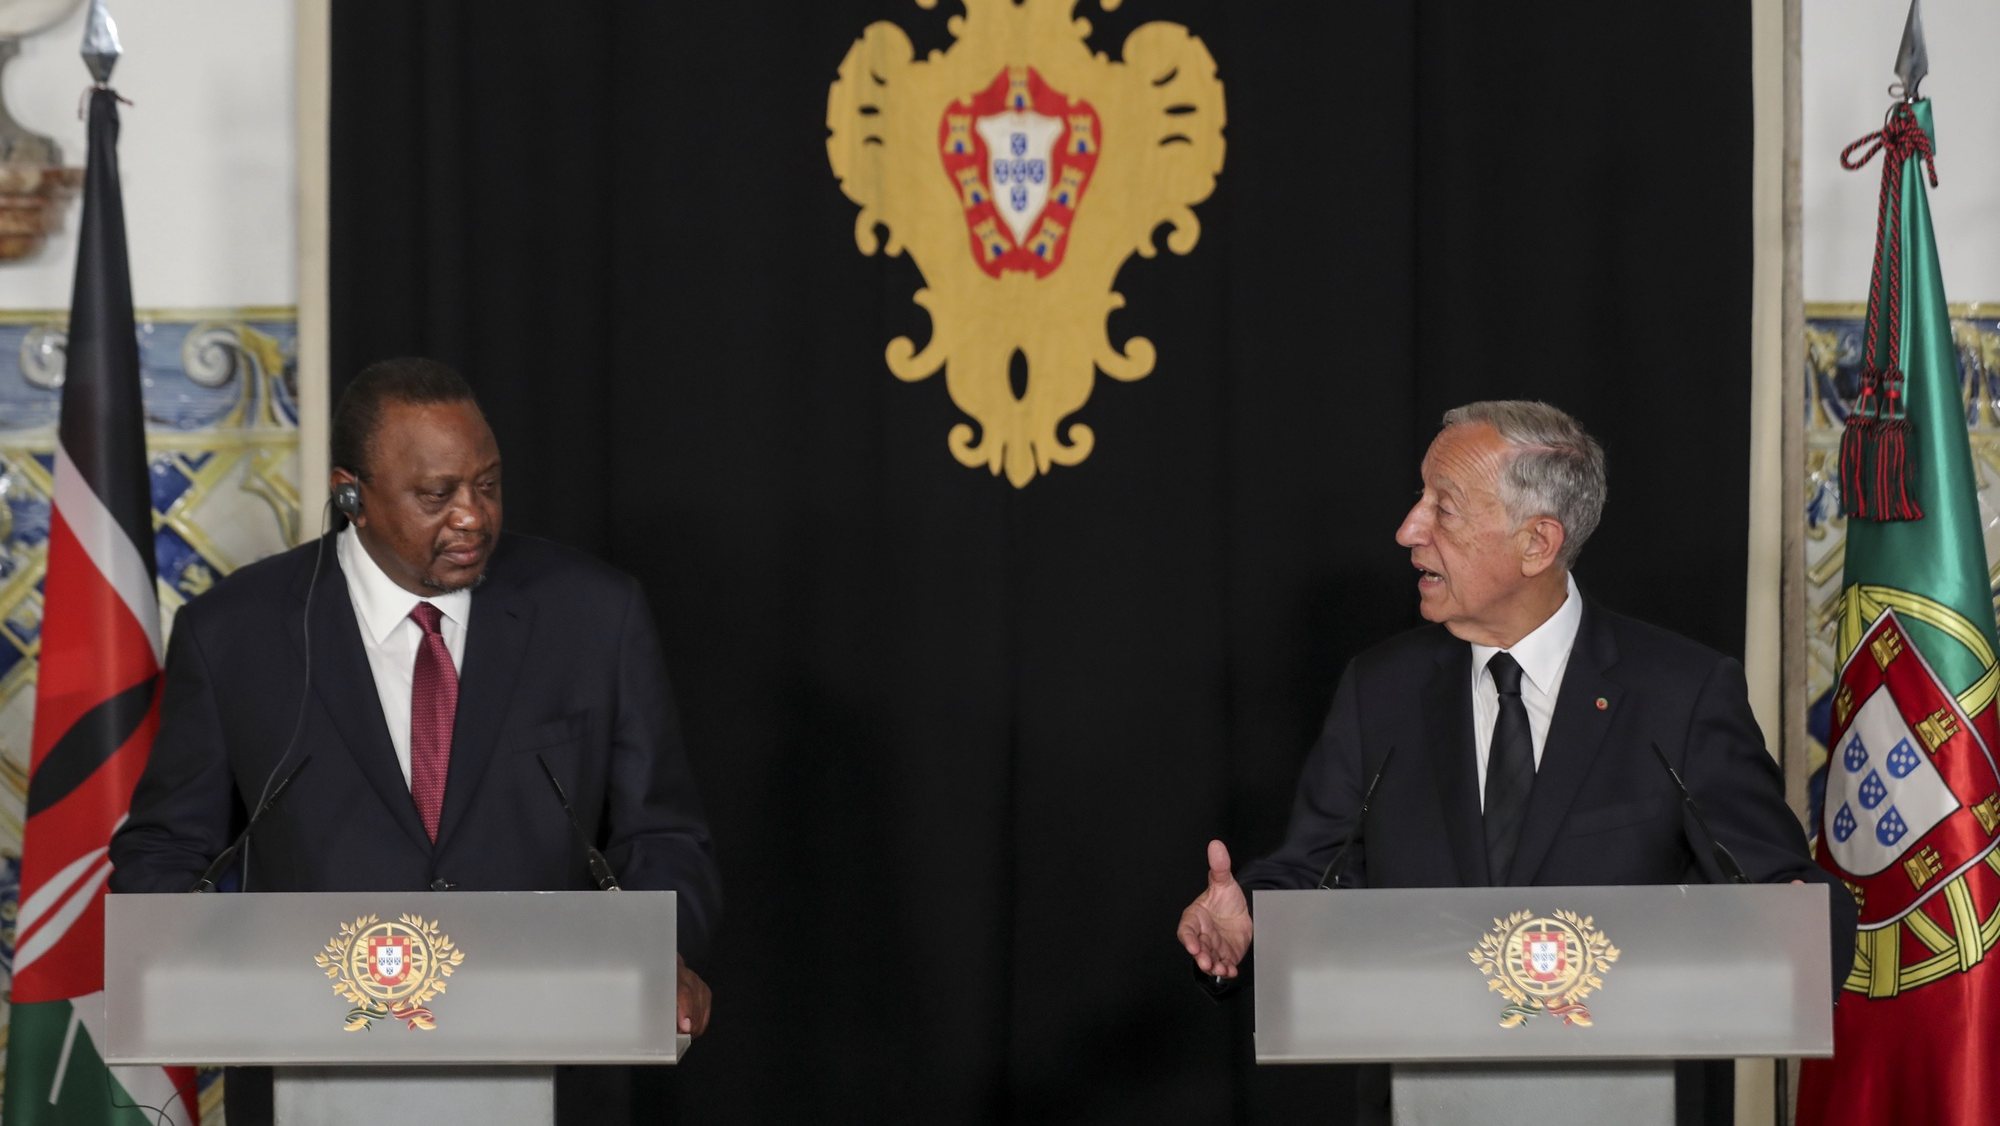 Portuguese President Marcelo Rebelo de Sousa (R) accompanied by Kenya President Uhuru Kenyatta (L) attend a joint press conference after state visit of Kenya&#039;s President to Portugal, Lisbon, 28th of June 2022. MIGUEL A. LOPES/LUSA